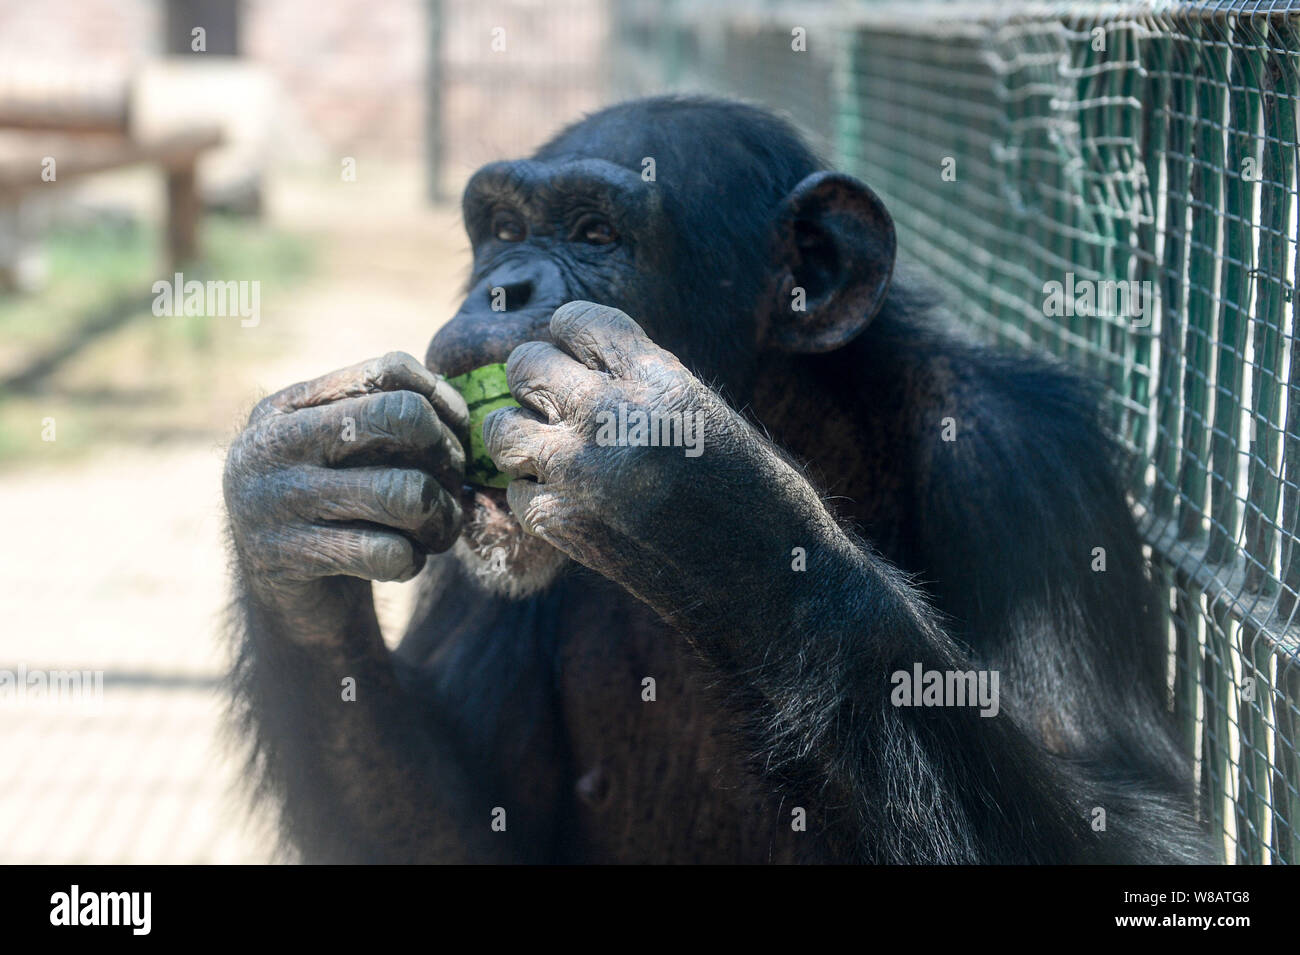 A chimpanzee eats watermelon to cool off on a scorcher at Beijing Wildlife Park in Beijing, China, 25 June 2016. Stock Photo